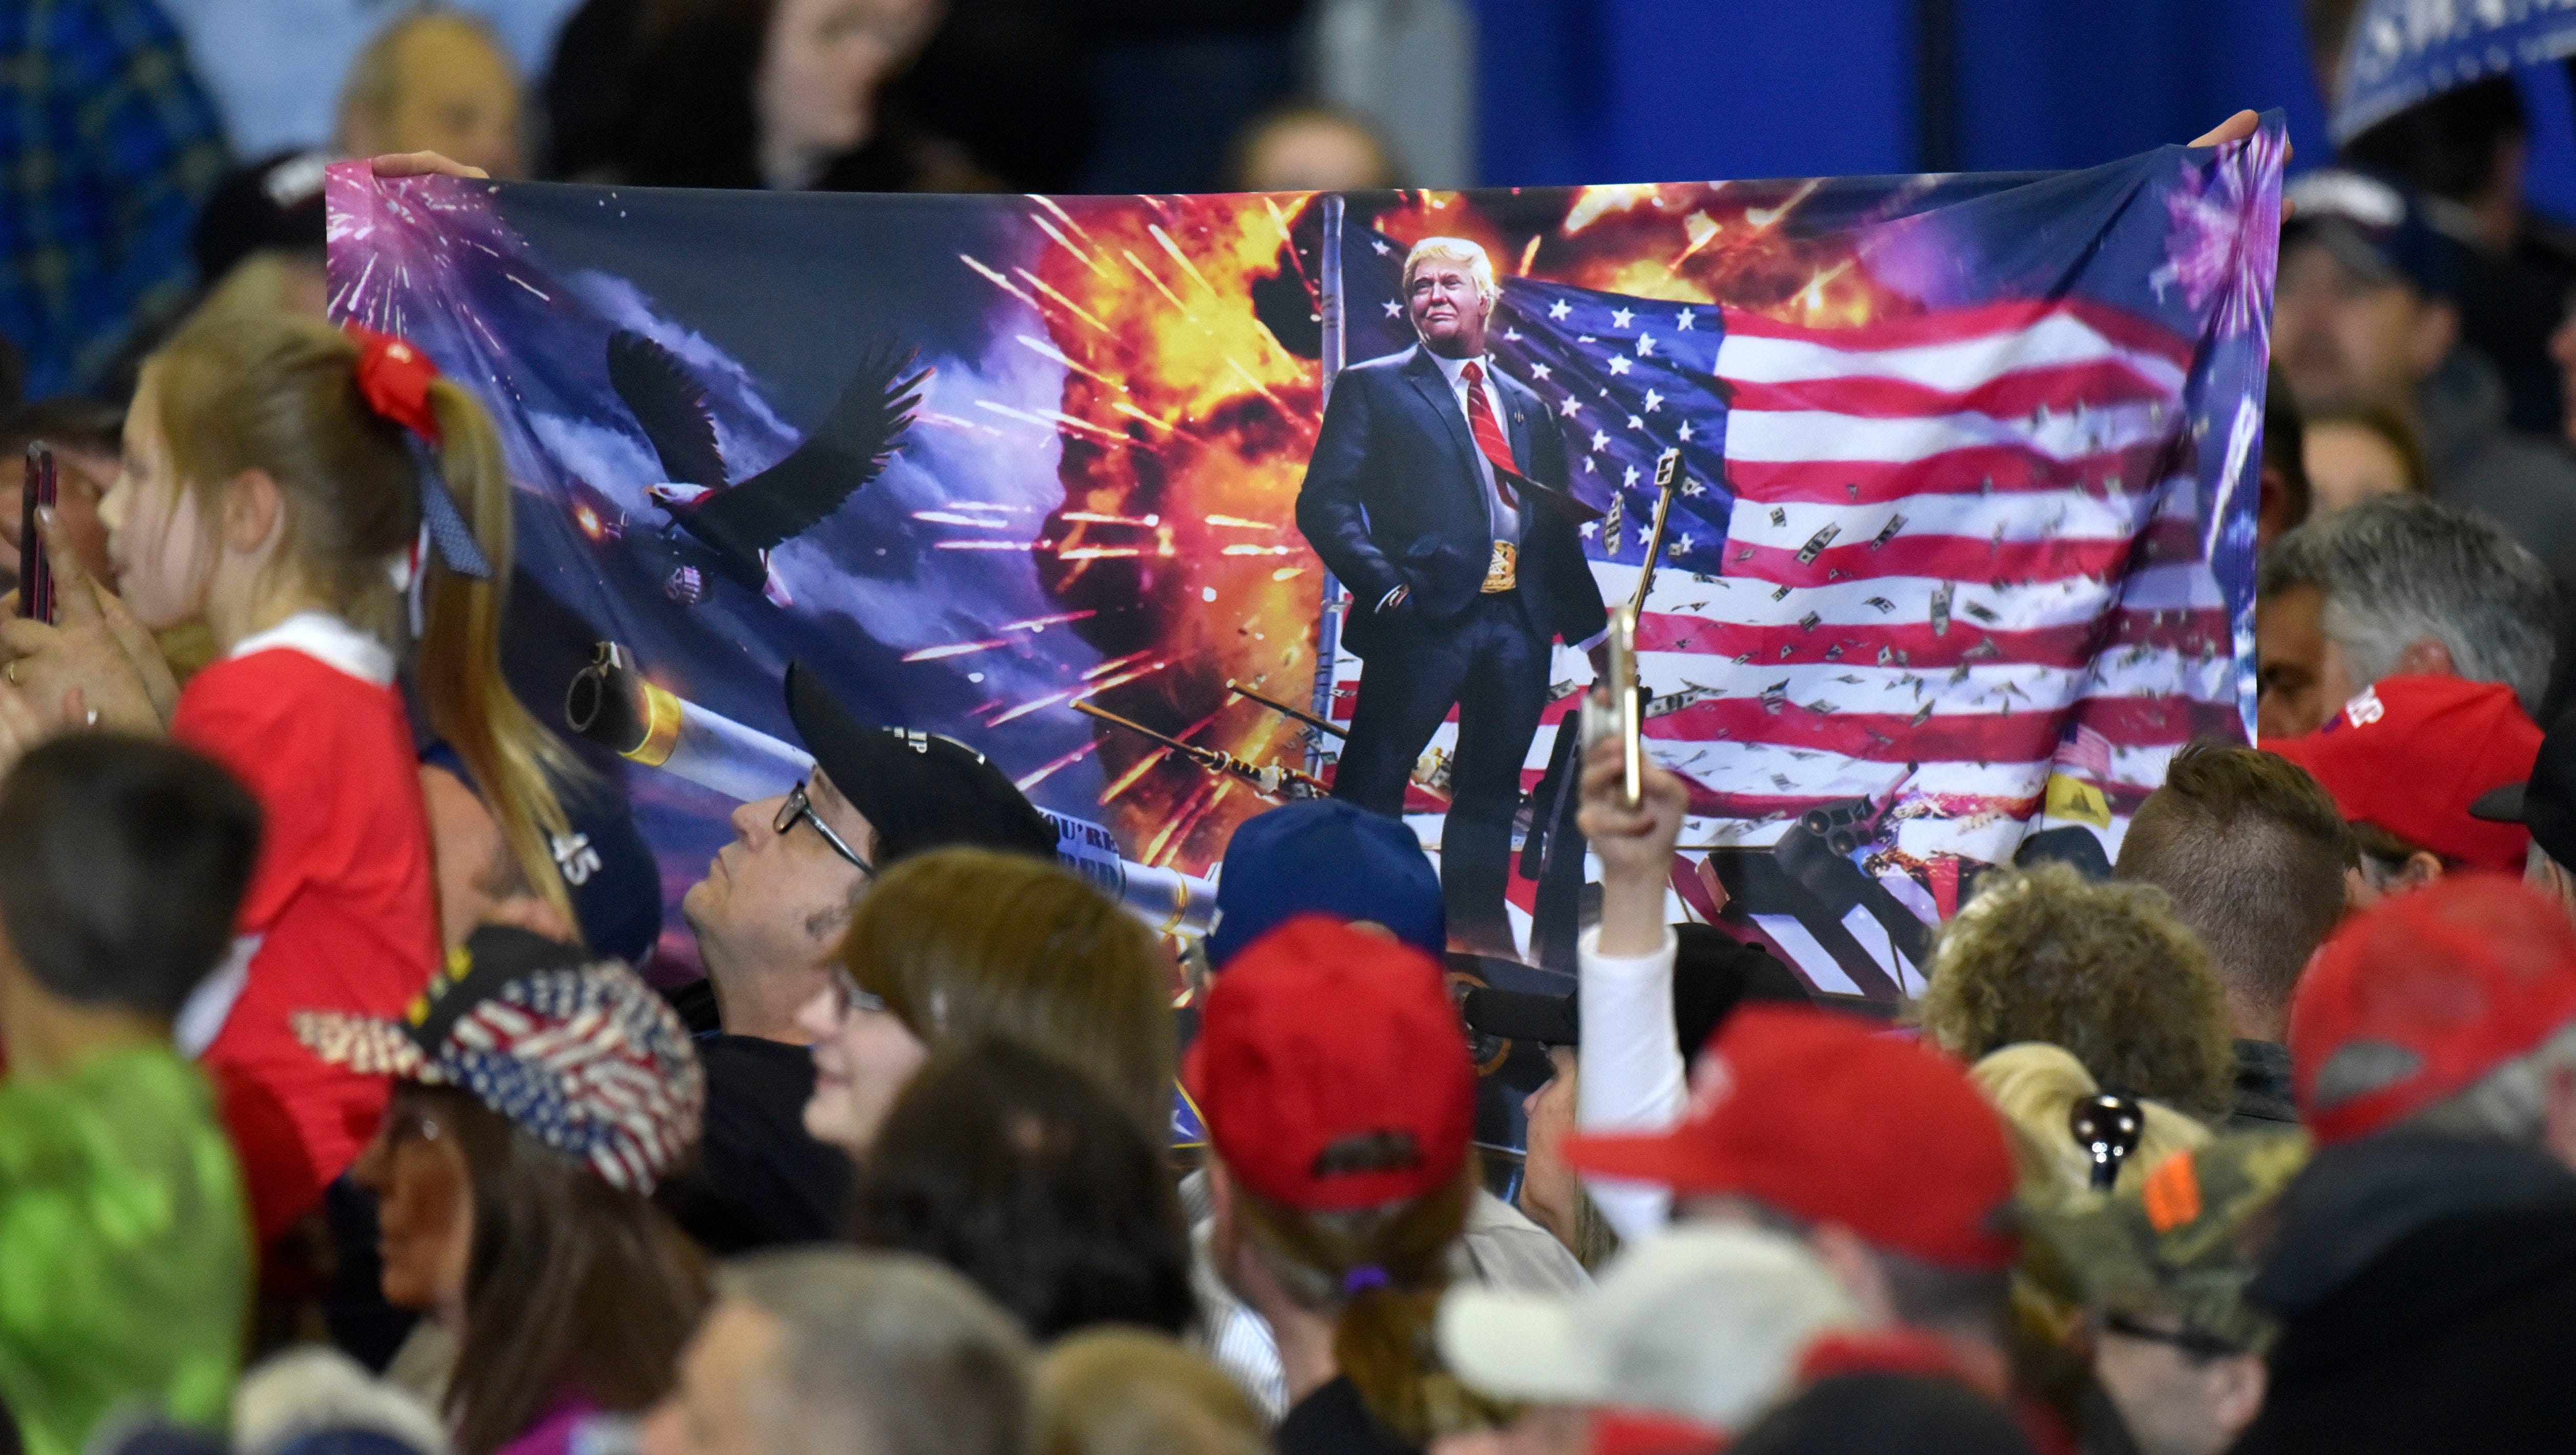 A supporter holds up a Trump flag.